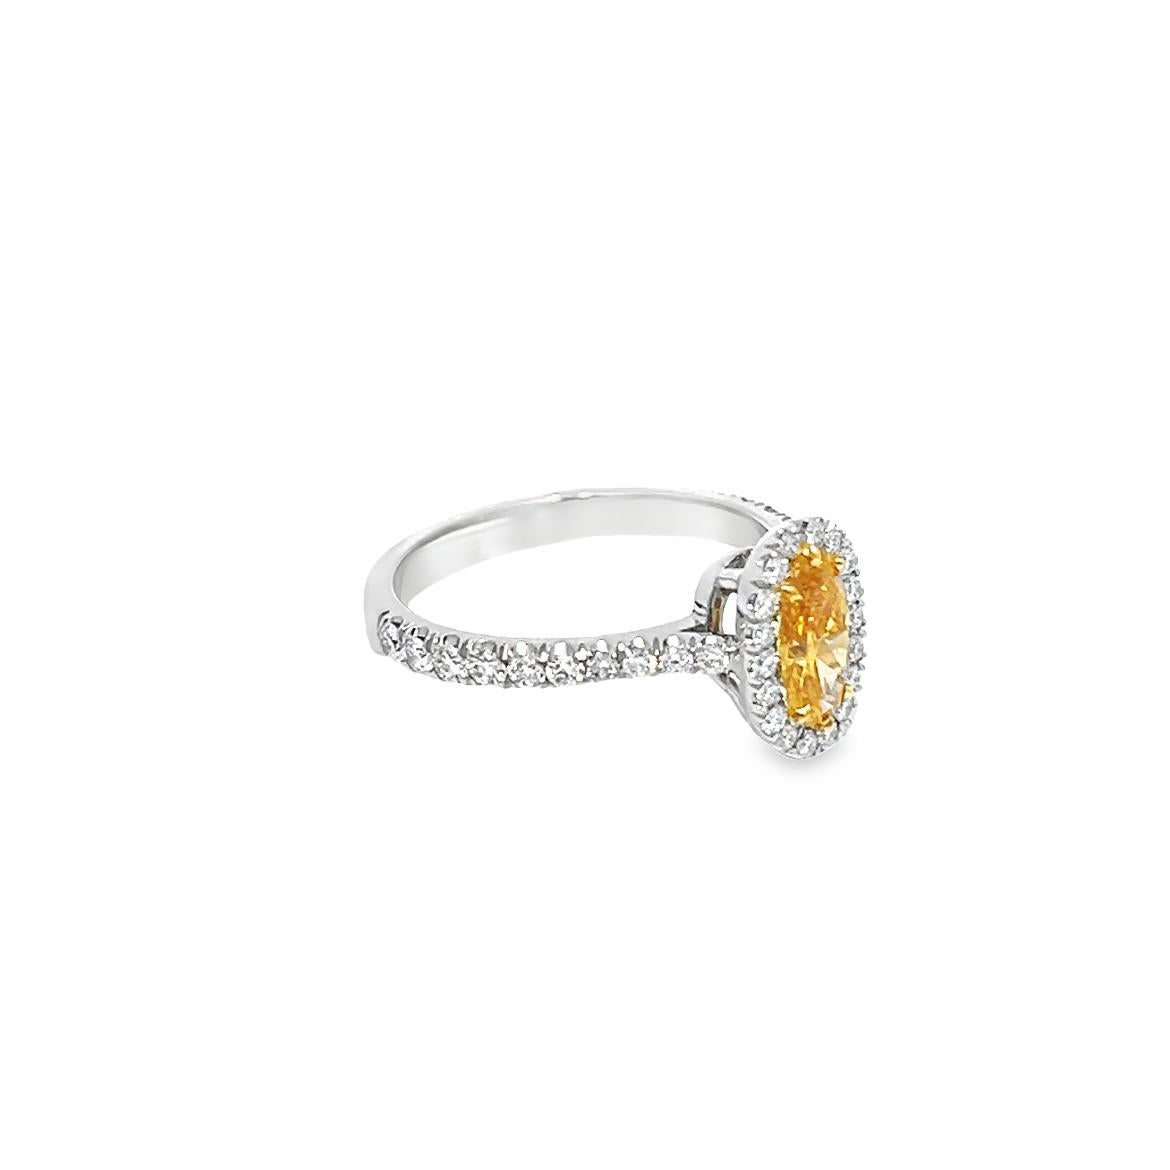 This stunning piece of jewelry showcases a natural, Fancy Vivid Yellow-Orange diamond that weighs 0.62 carats and is GIA-certified with SI2 clarity and even color distribution. The diamond is a one-of-a-kind masterpiece and bears the unique